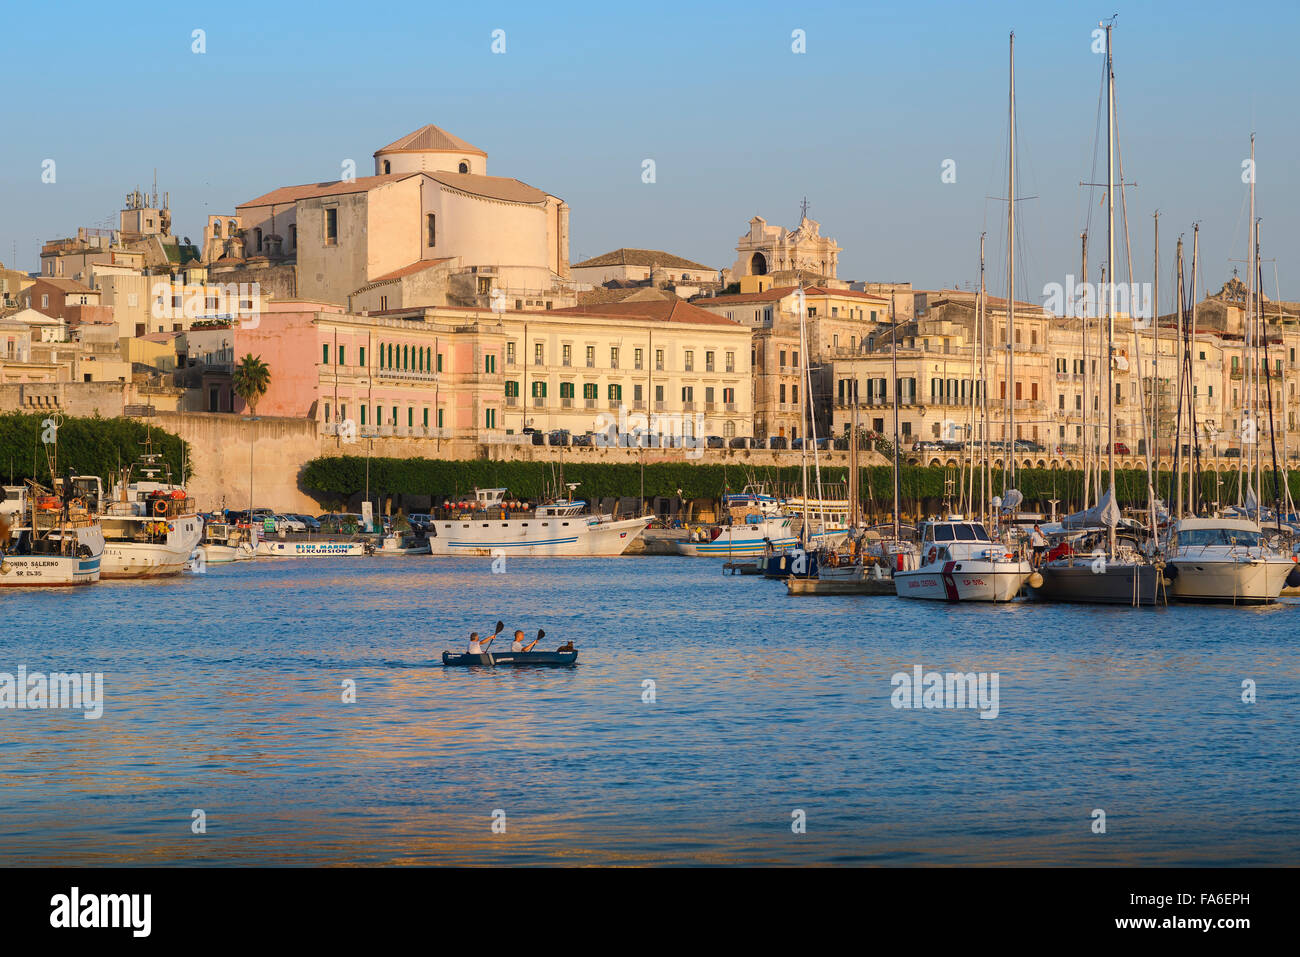 Syracuse Sicily skyline, view of two canoeists with a dog onboard gliding through the harbour of Ortygia (Ortigia) Syracuse, Sicily. Stock Photo